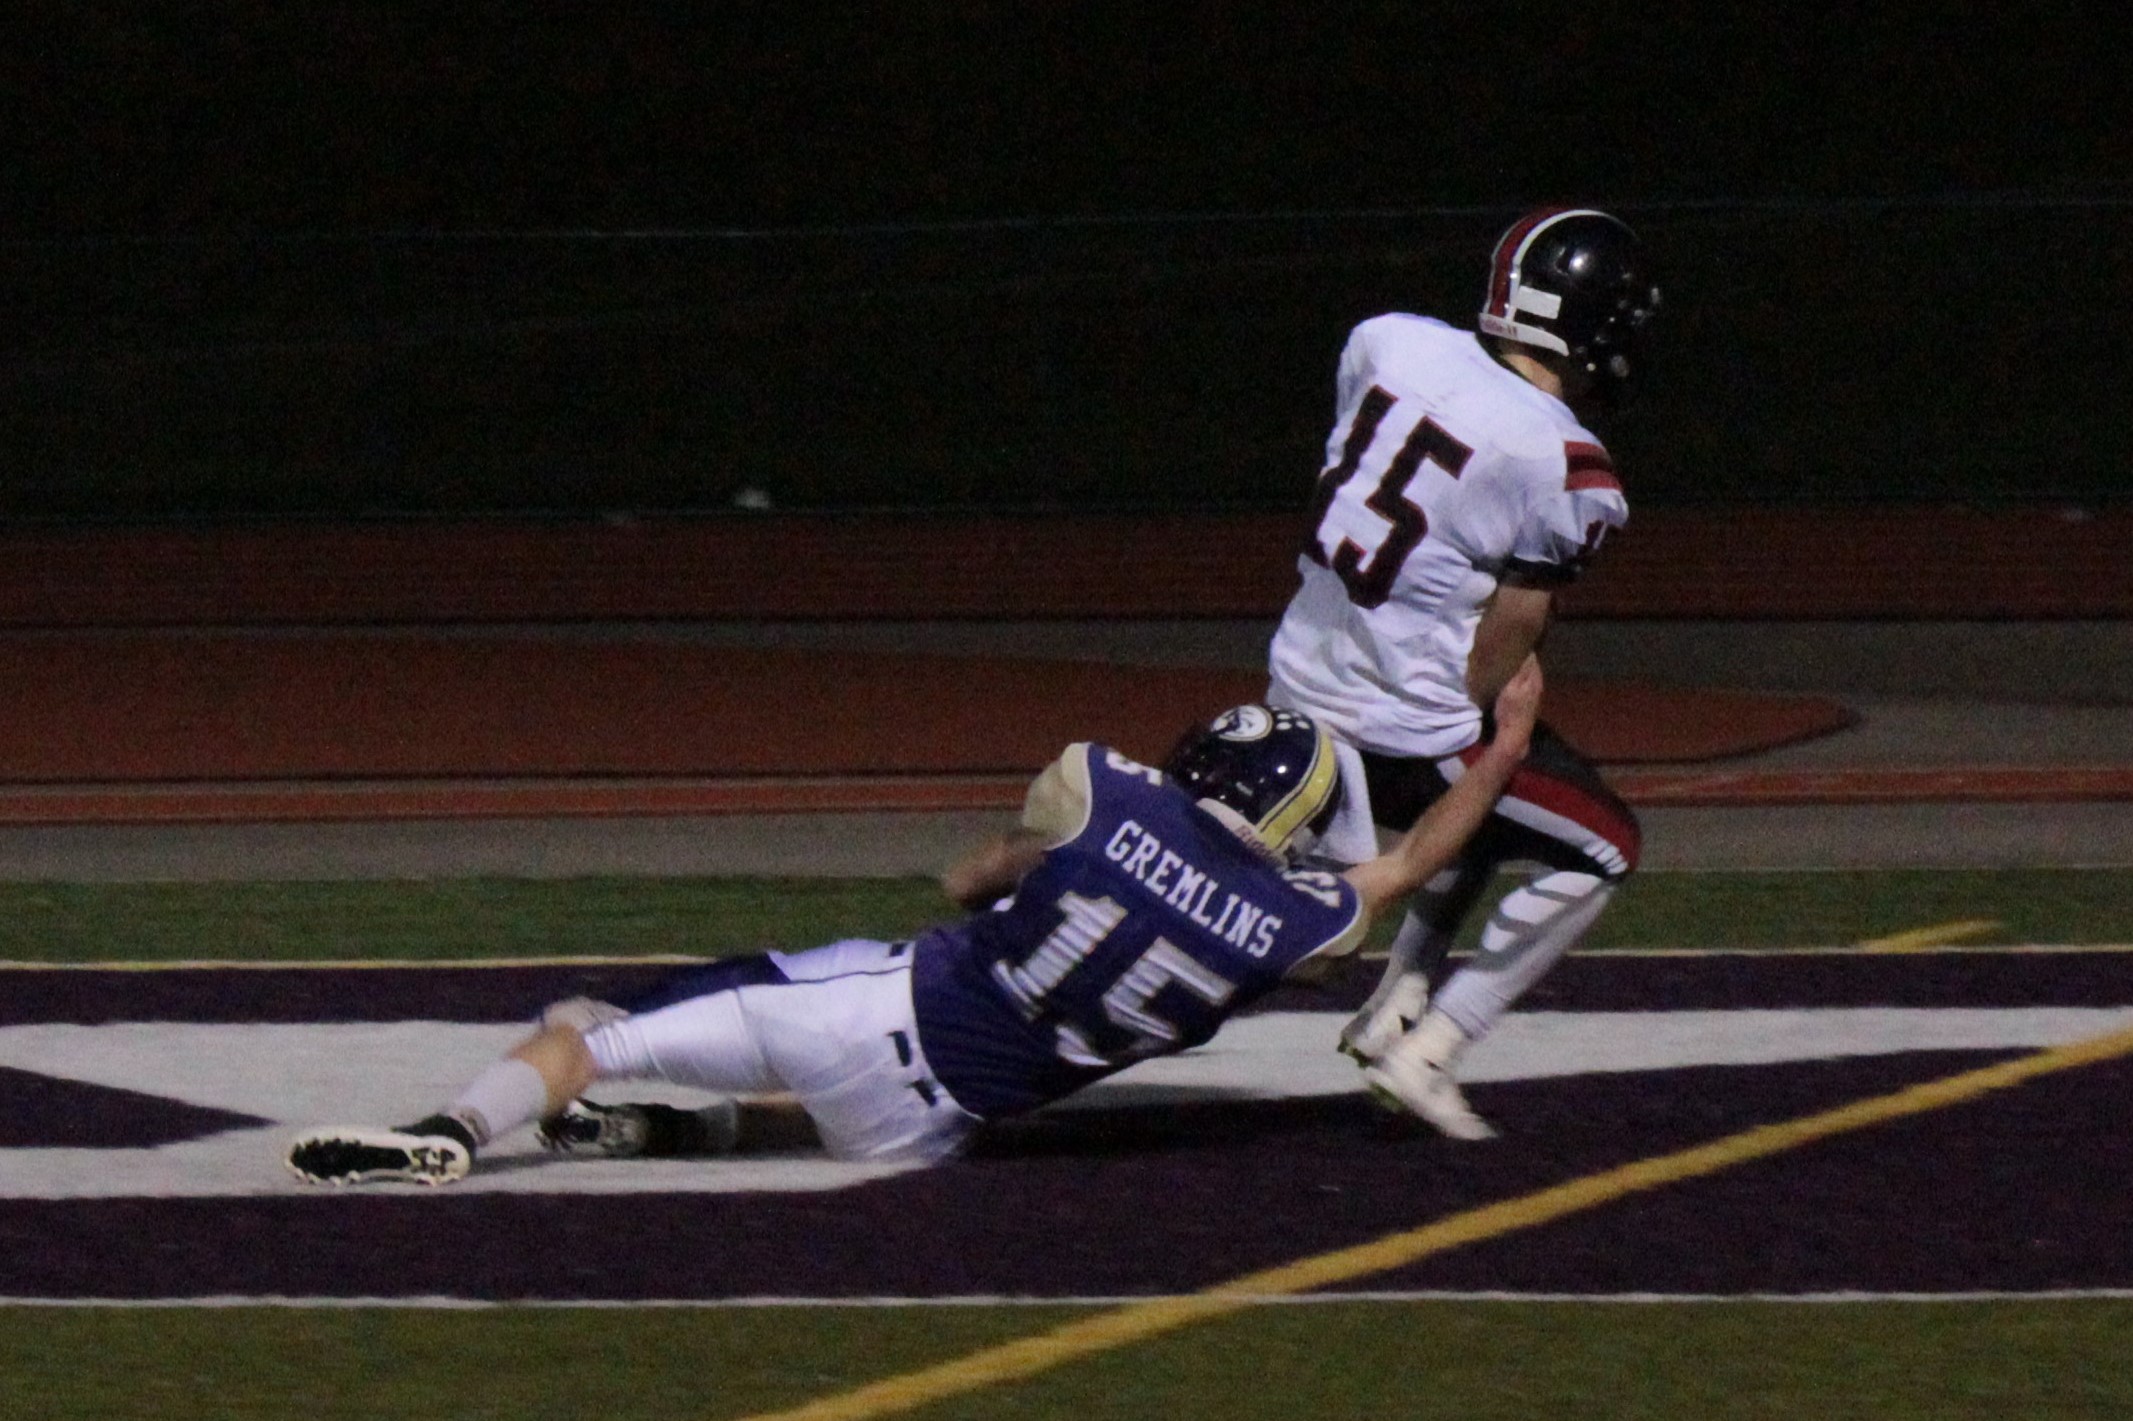 Micah Heichel (15 White) only had two receptions against Karns City.  Both were for touchdowns.